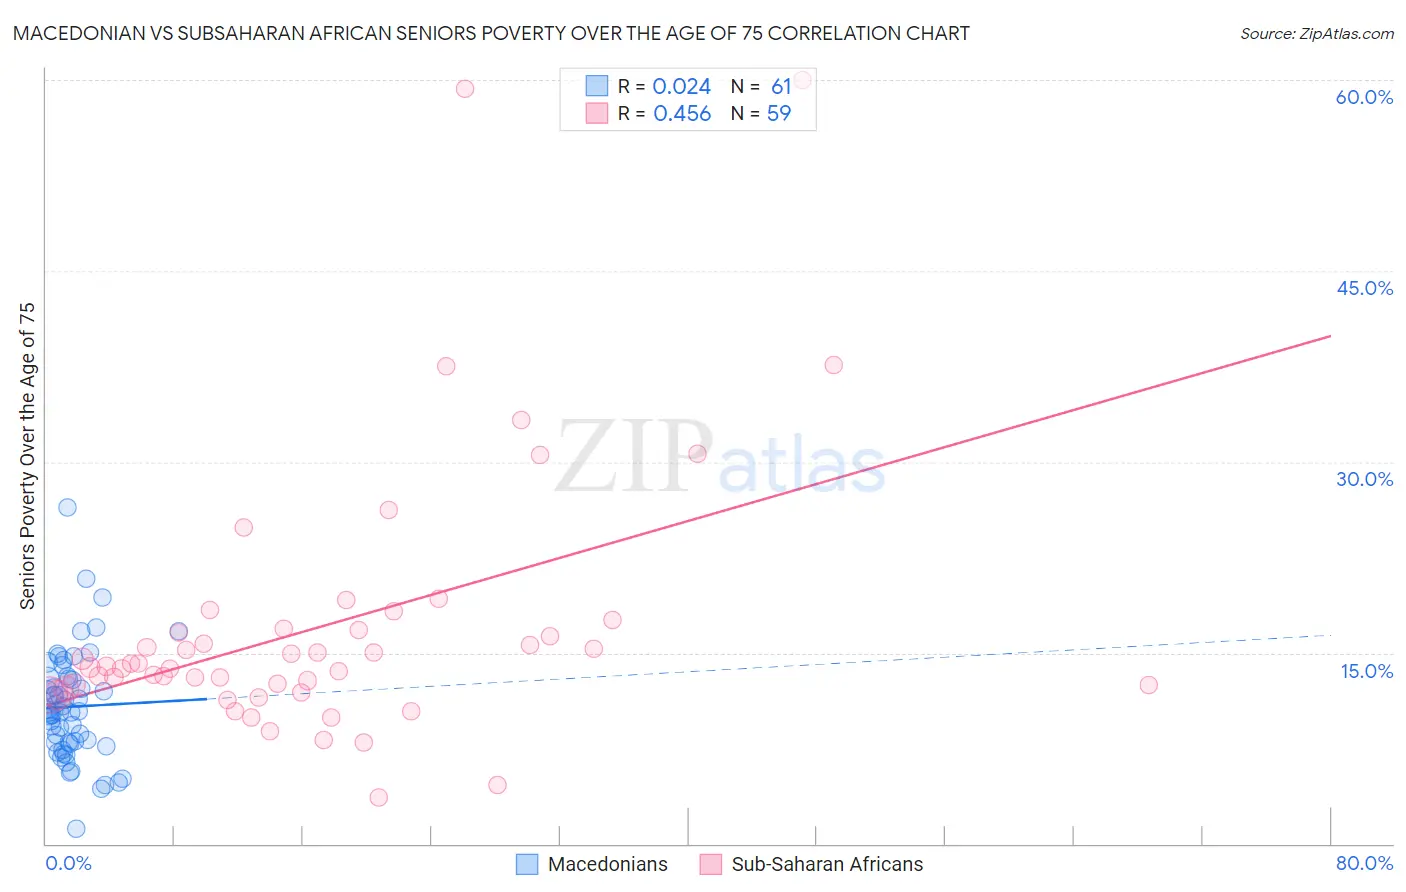 Macedonian vs Subsaharan African Seniors Poverty Over the Age of 75